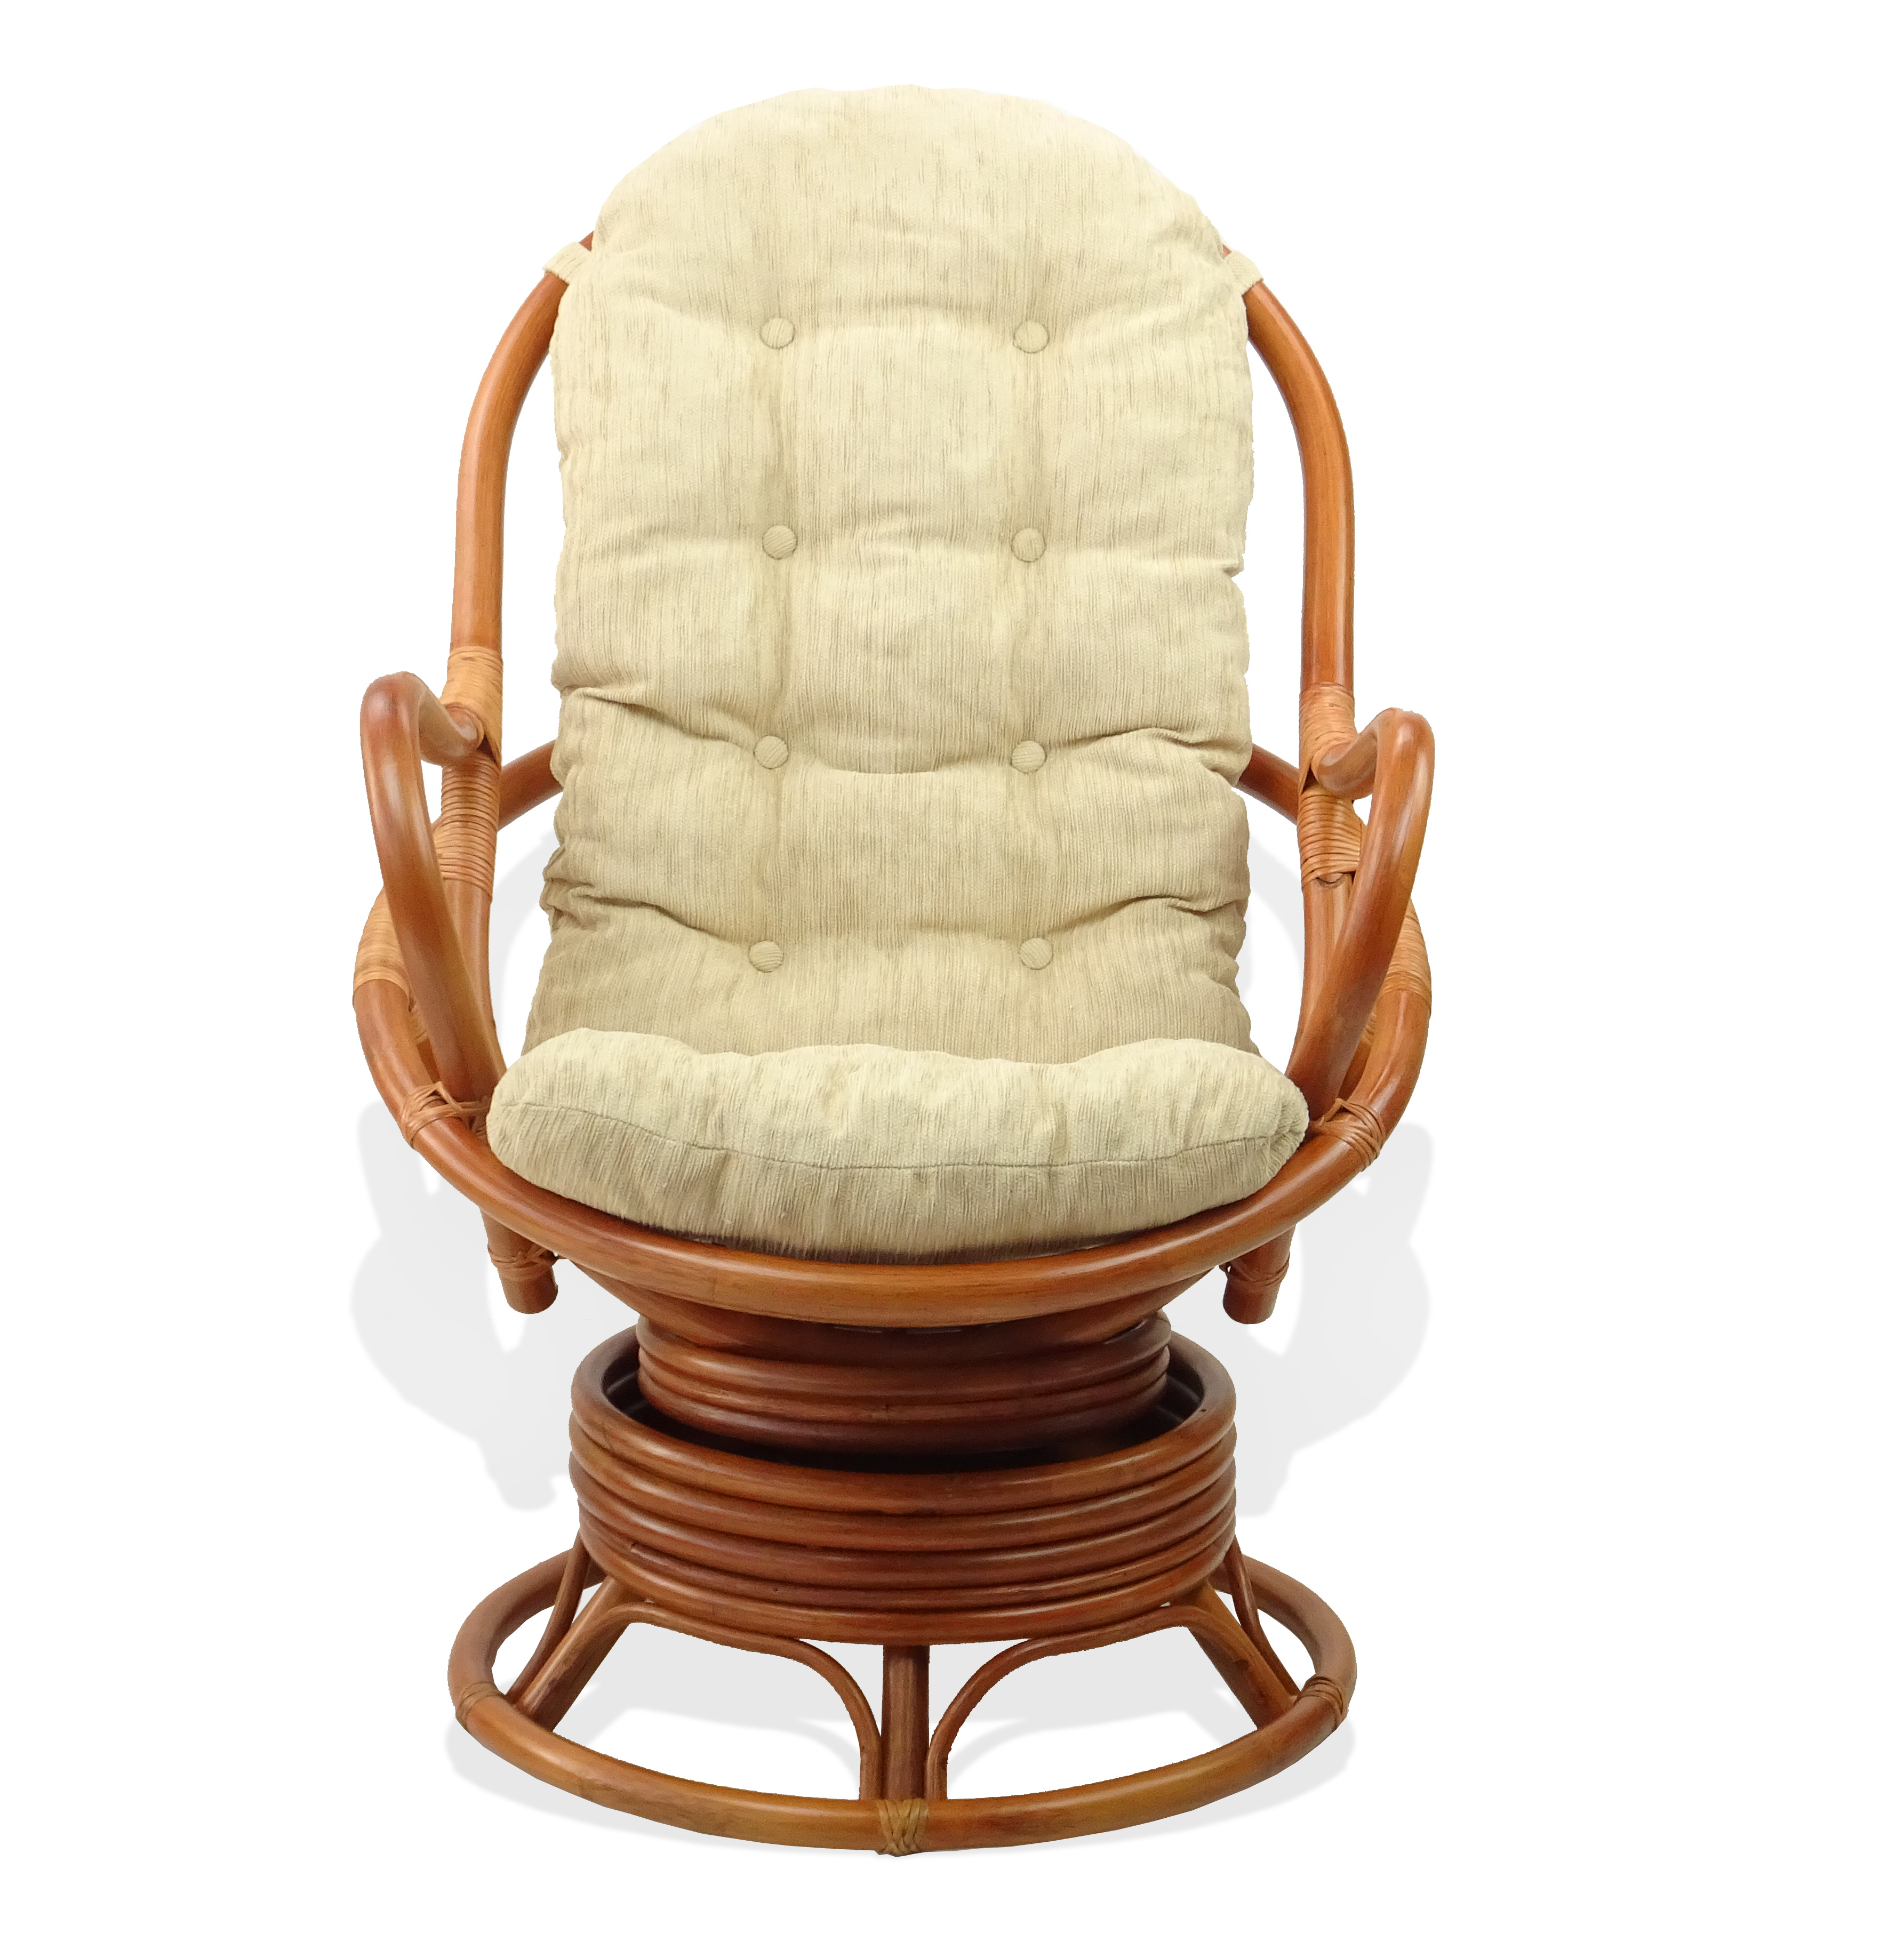 SK New Interiors Set of Swivel Rocking Lounge Java Chair Natural Rattan Wicker Handmade w/Cream Cushions and Round Coffee Table w/Glass, Colonial - image 5 of 7